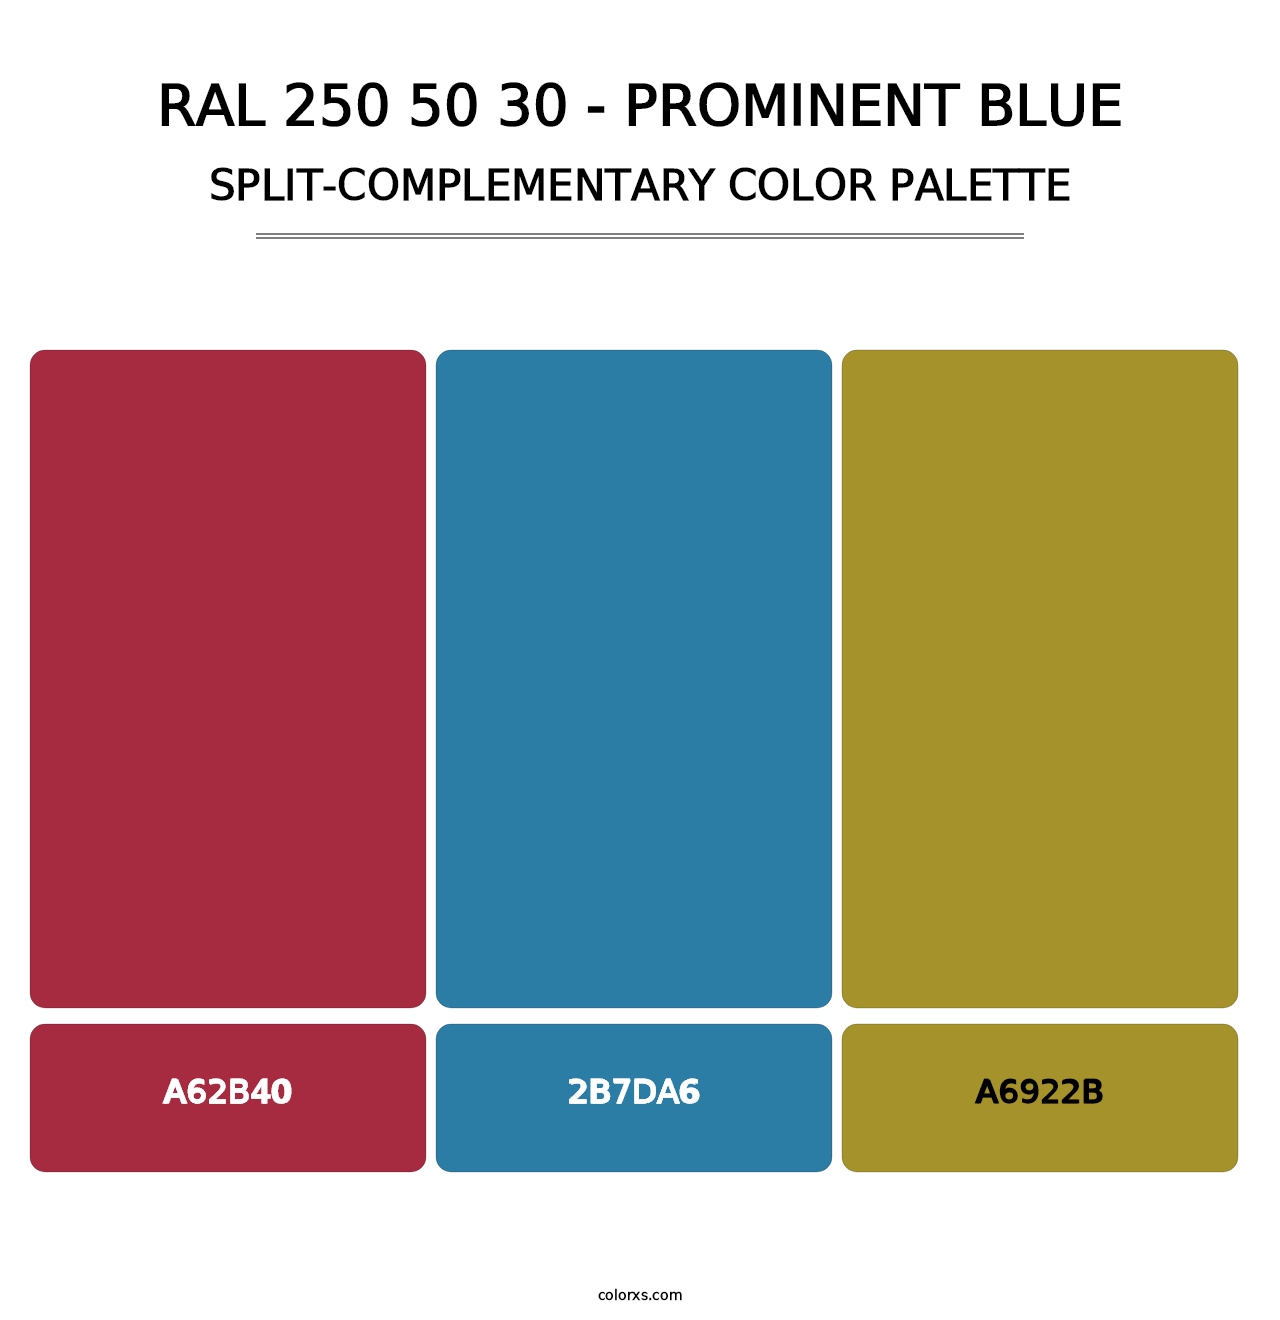 RAL 250 50 30 - Prominent Blue - Split-Complementary Color Palette